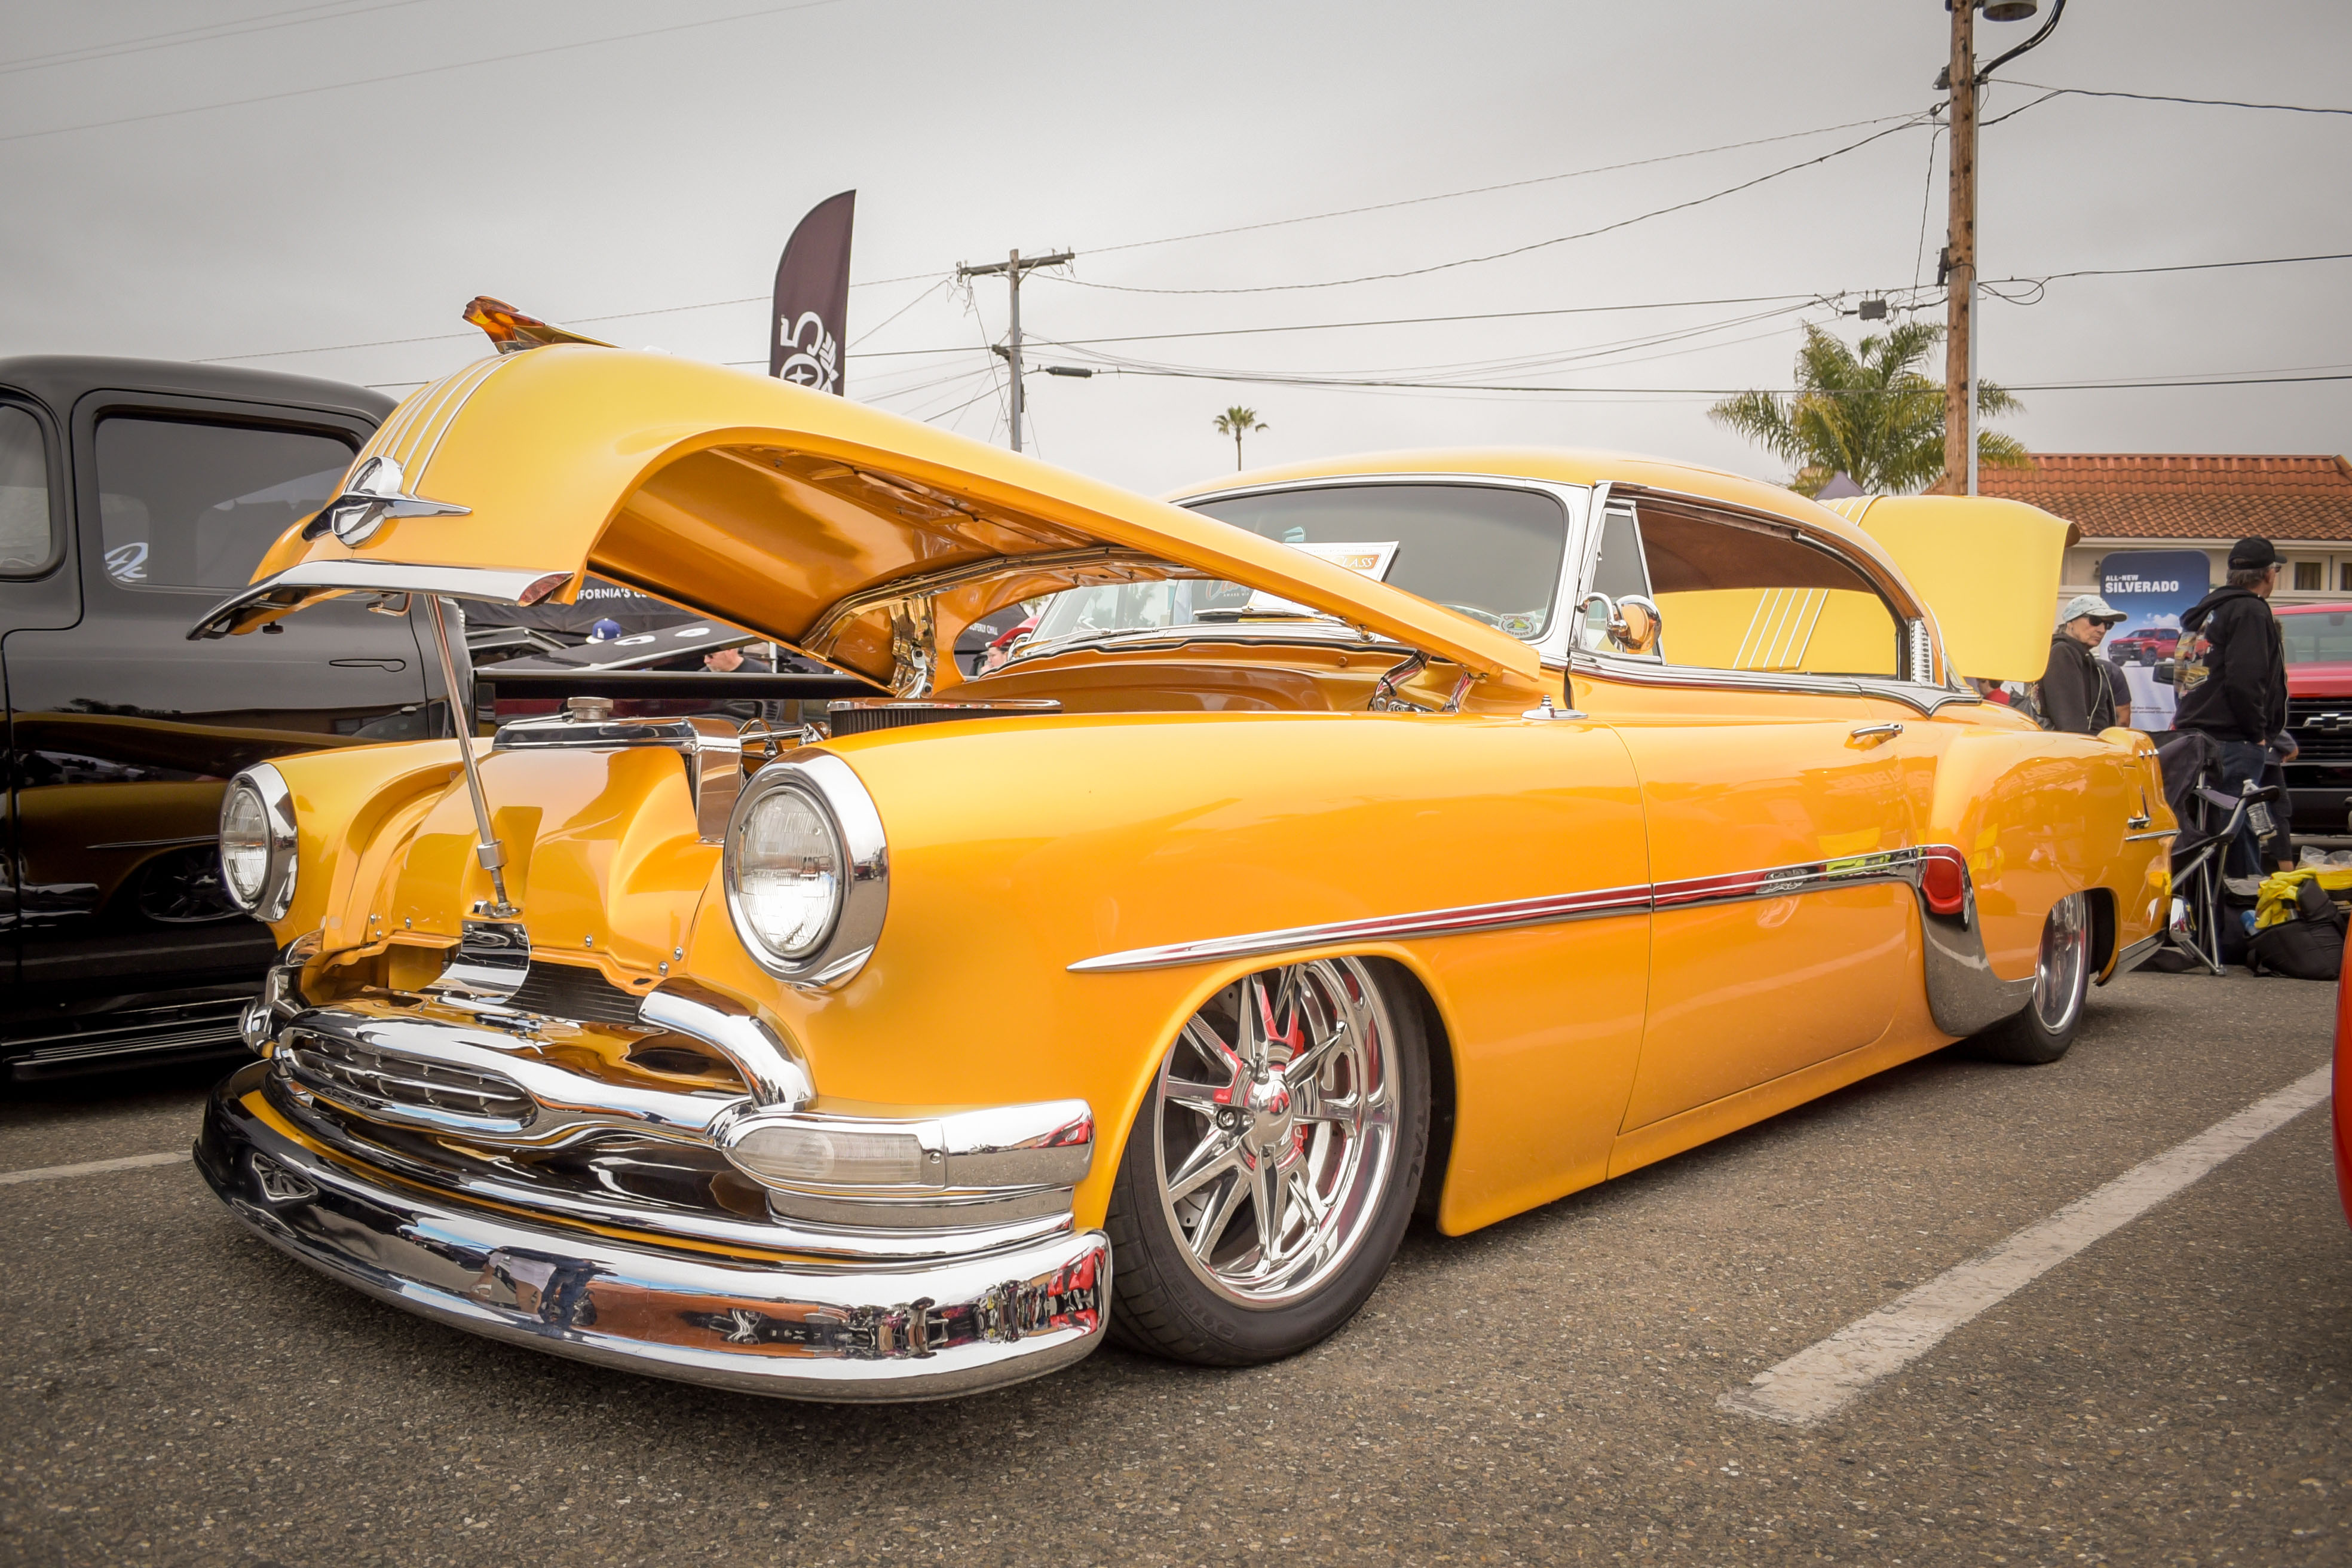 The Classic at Pismo Beach Car Show May 31 June 2, 2019